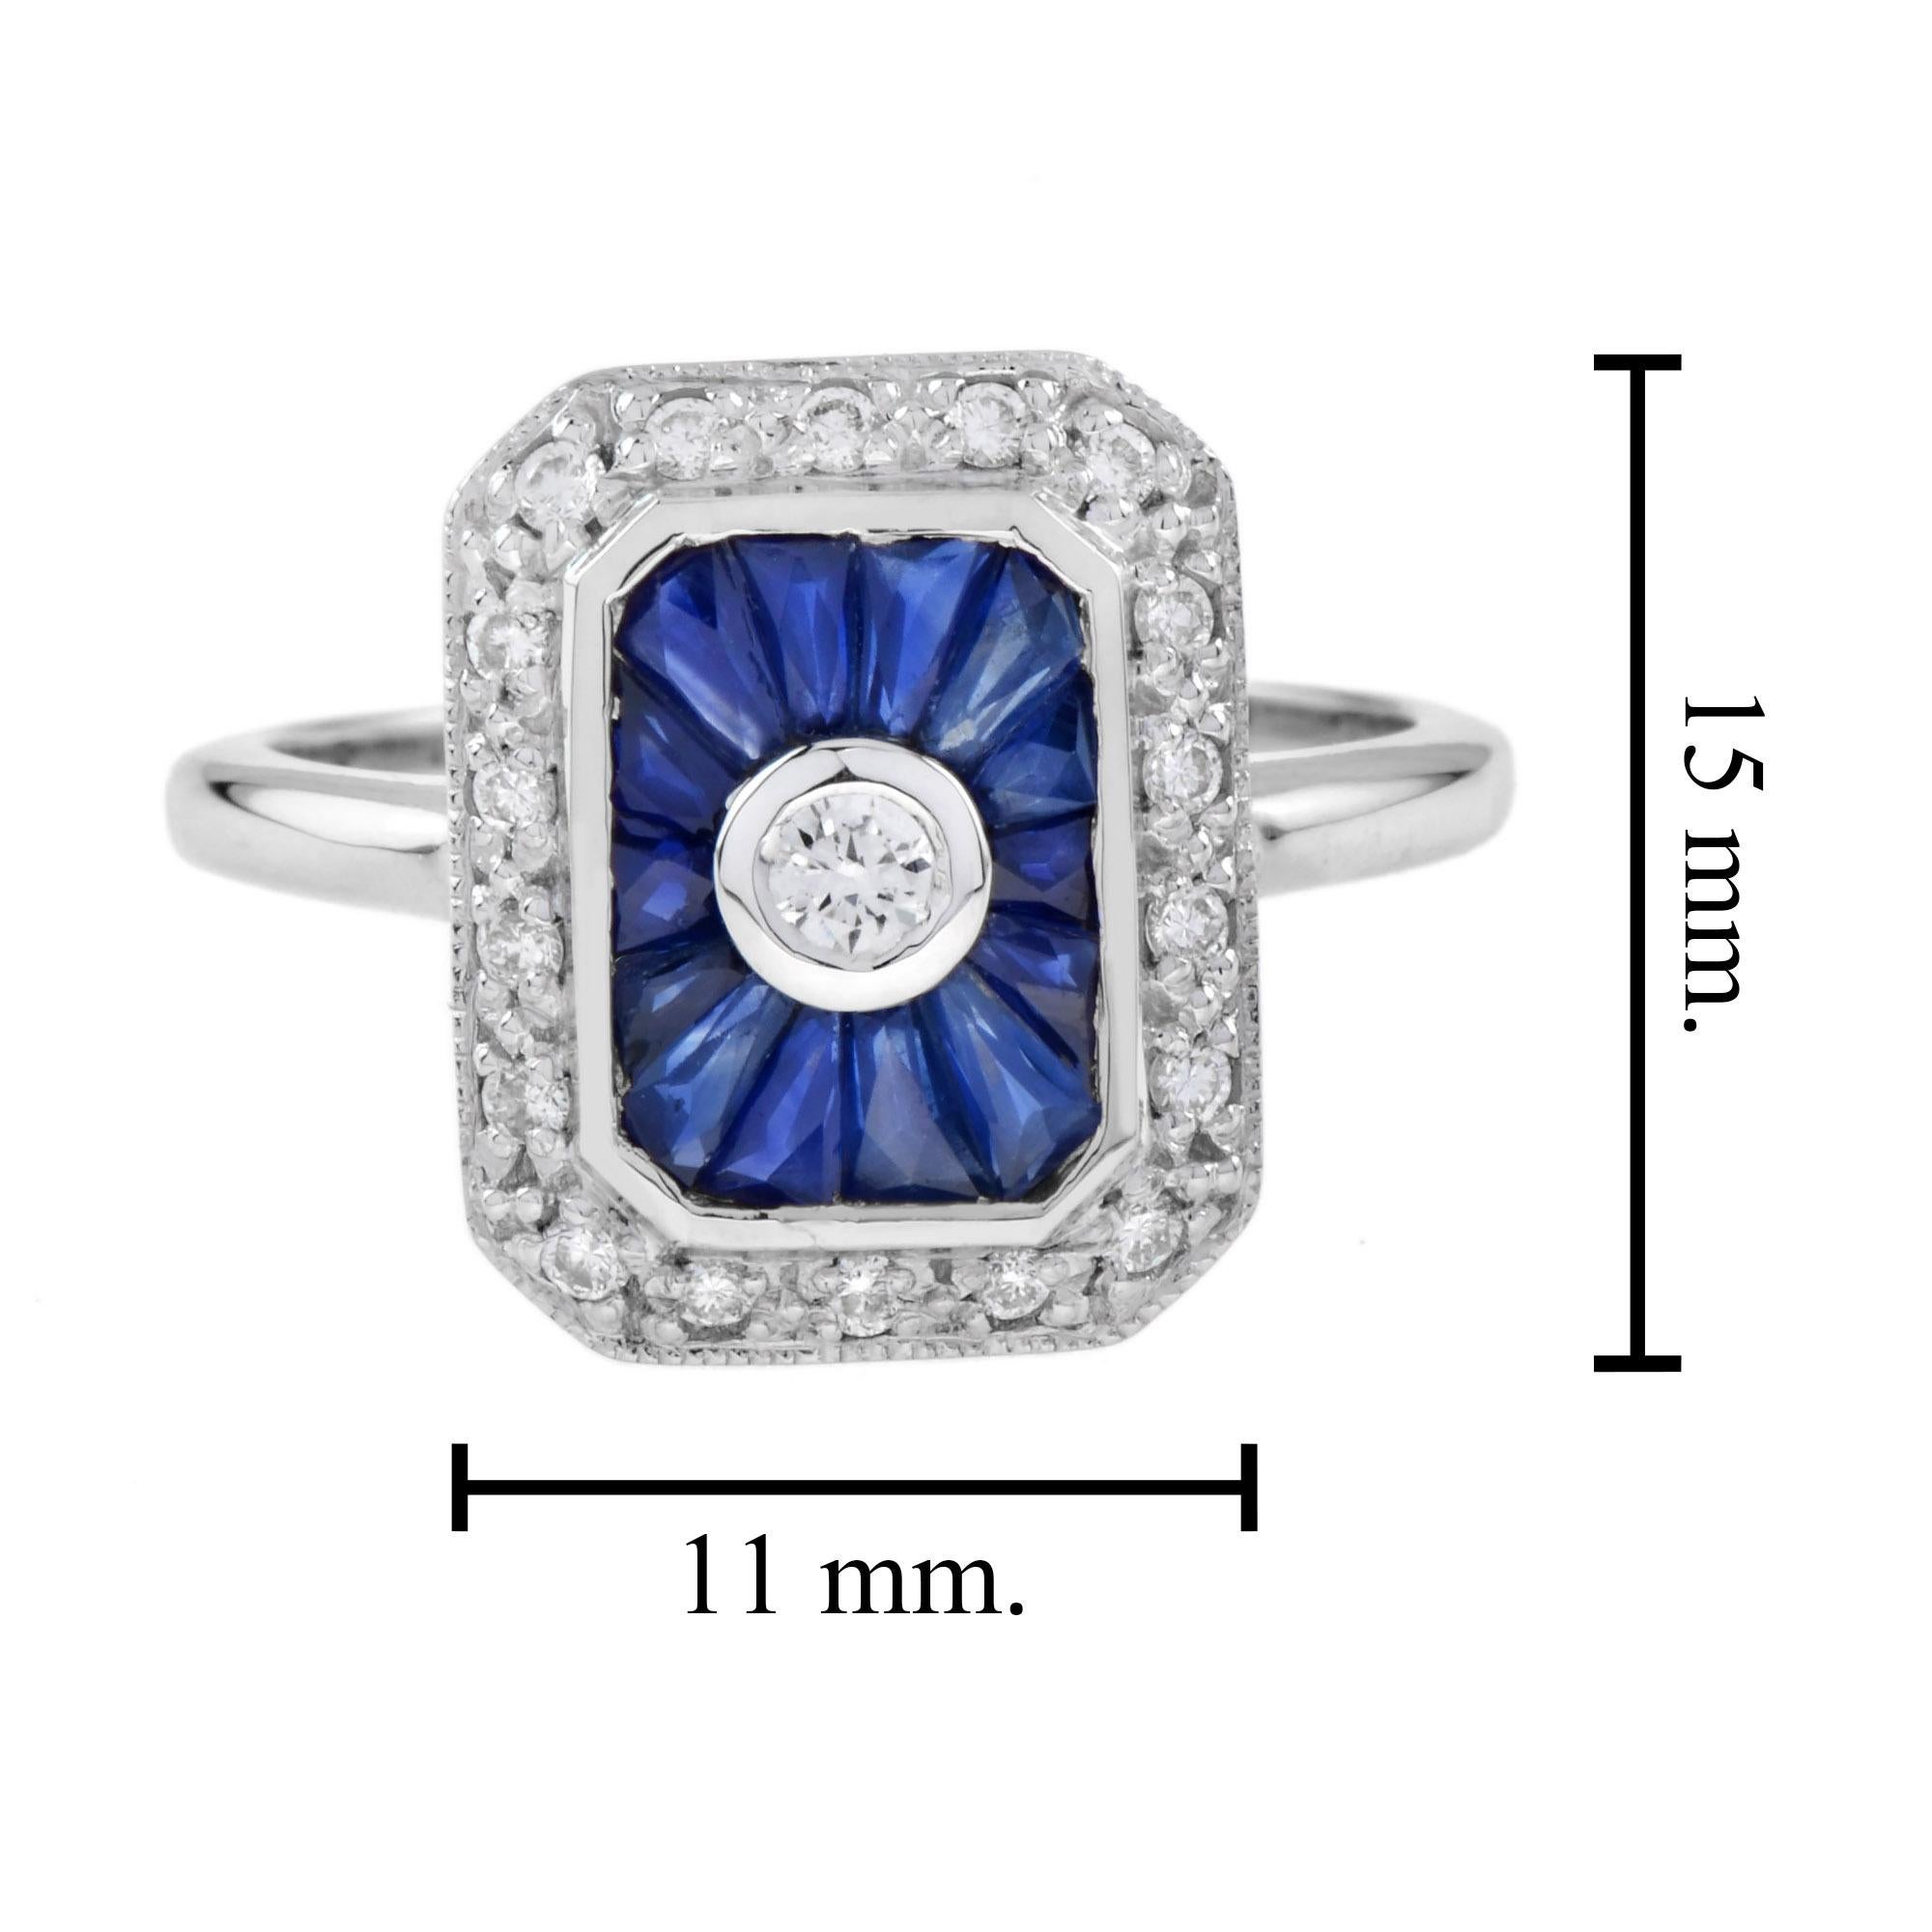 Diamond and Sapphire Art Deco Style Engagement Ring in 9K White Gold 2